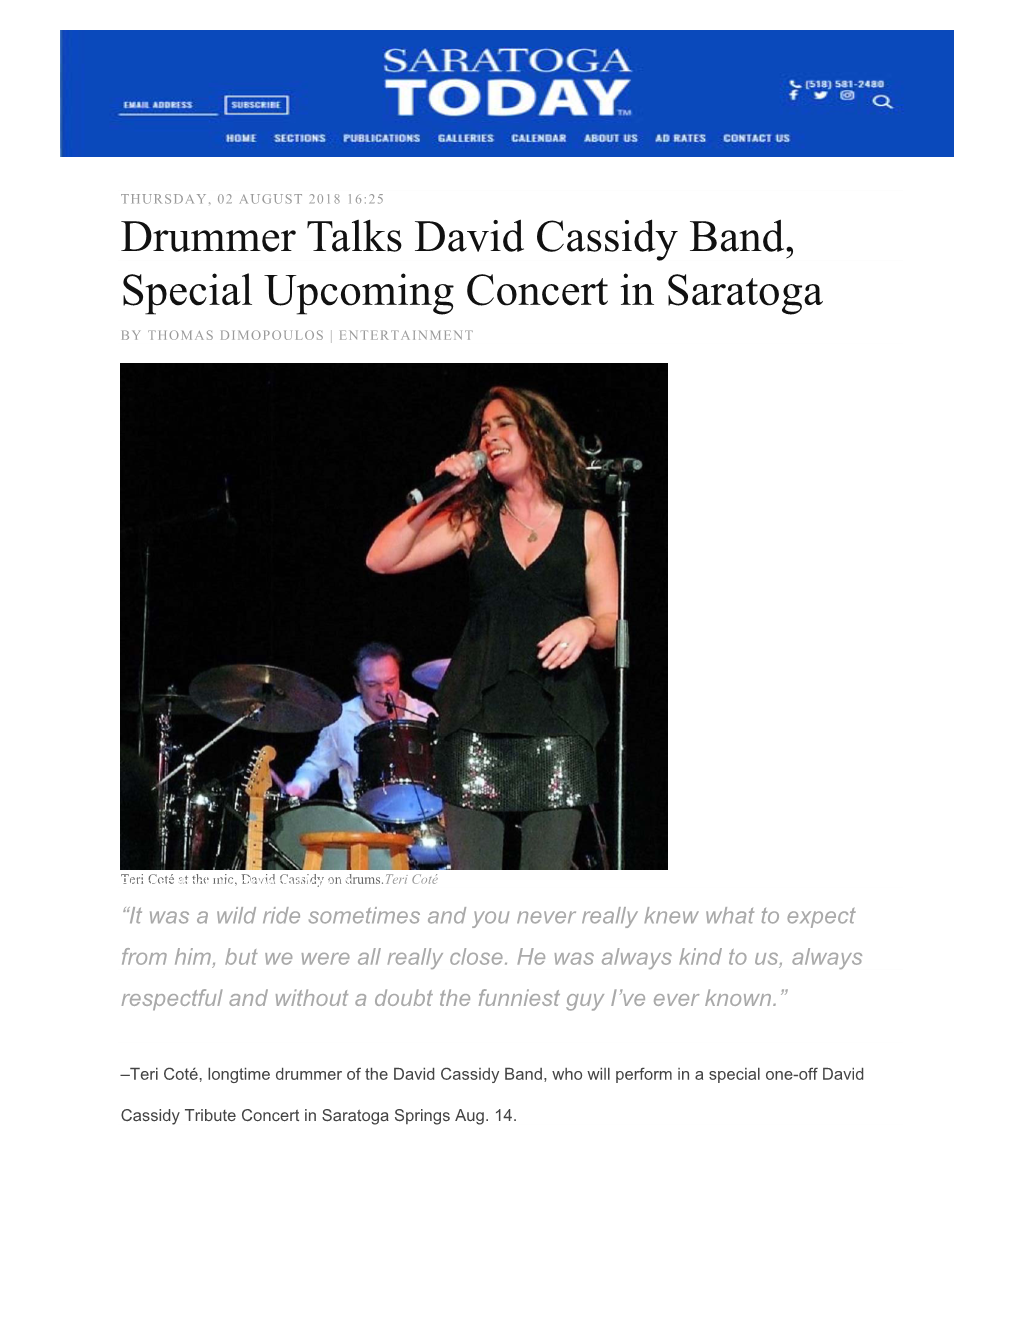 Drummer Talks David Cassidy Band, Special Upcoming Concert in Saratoga